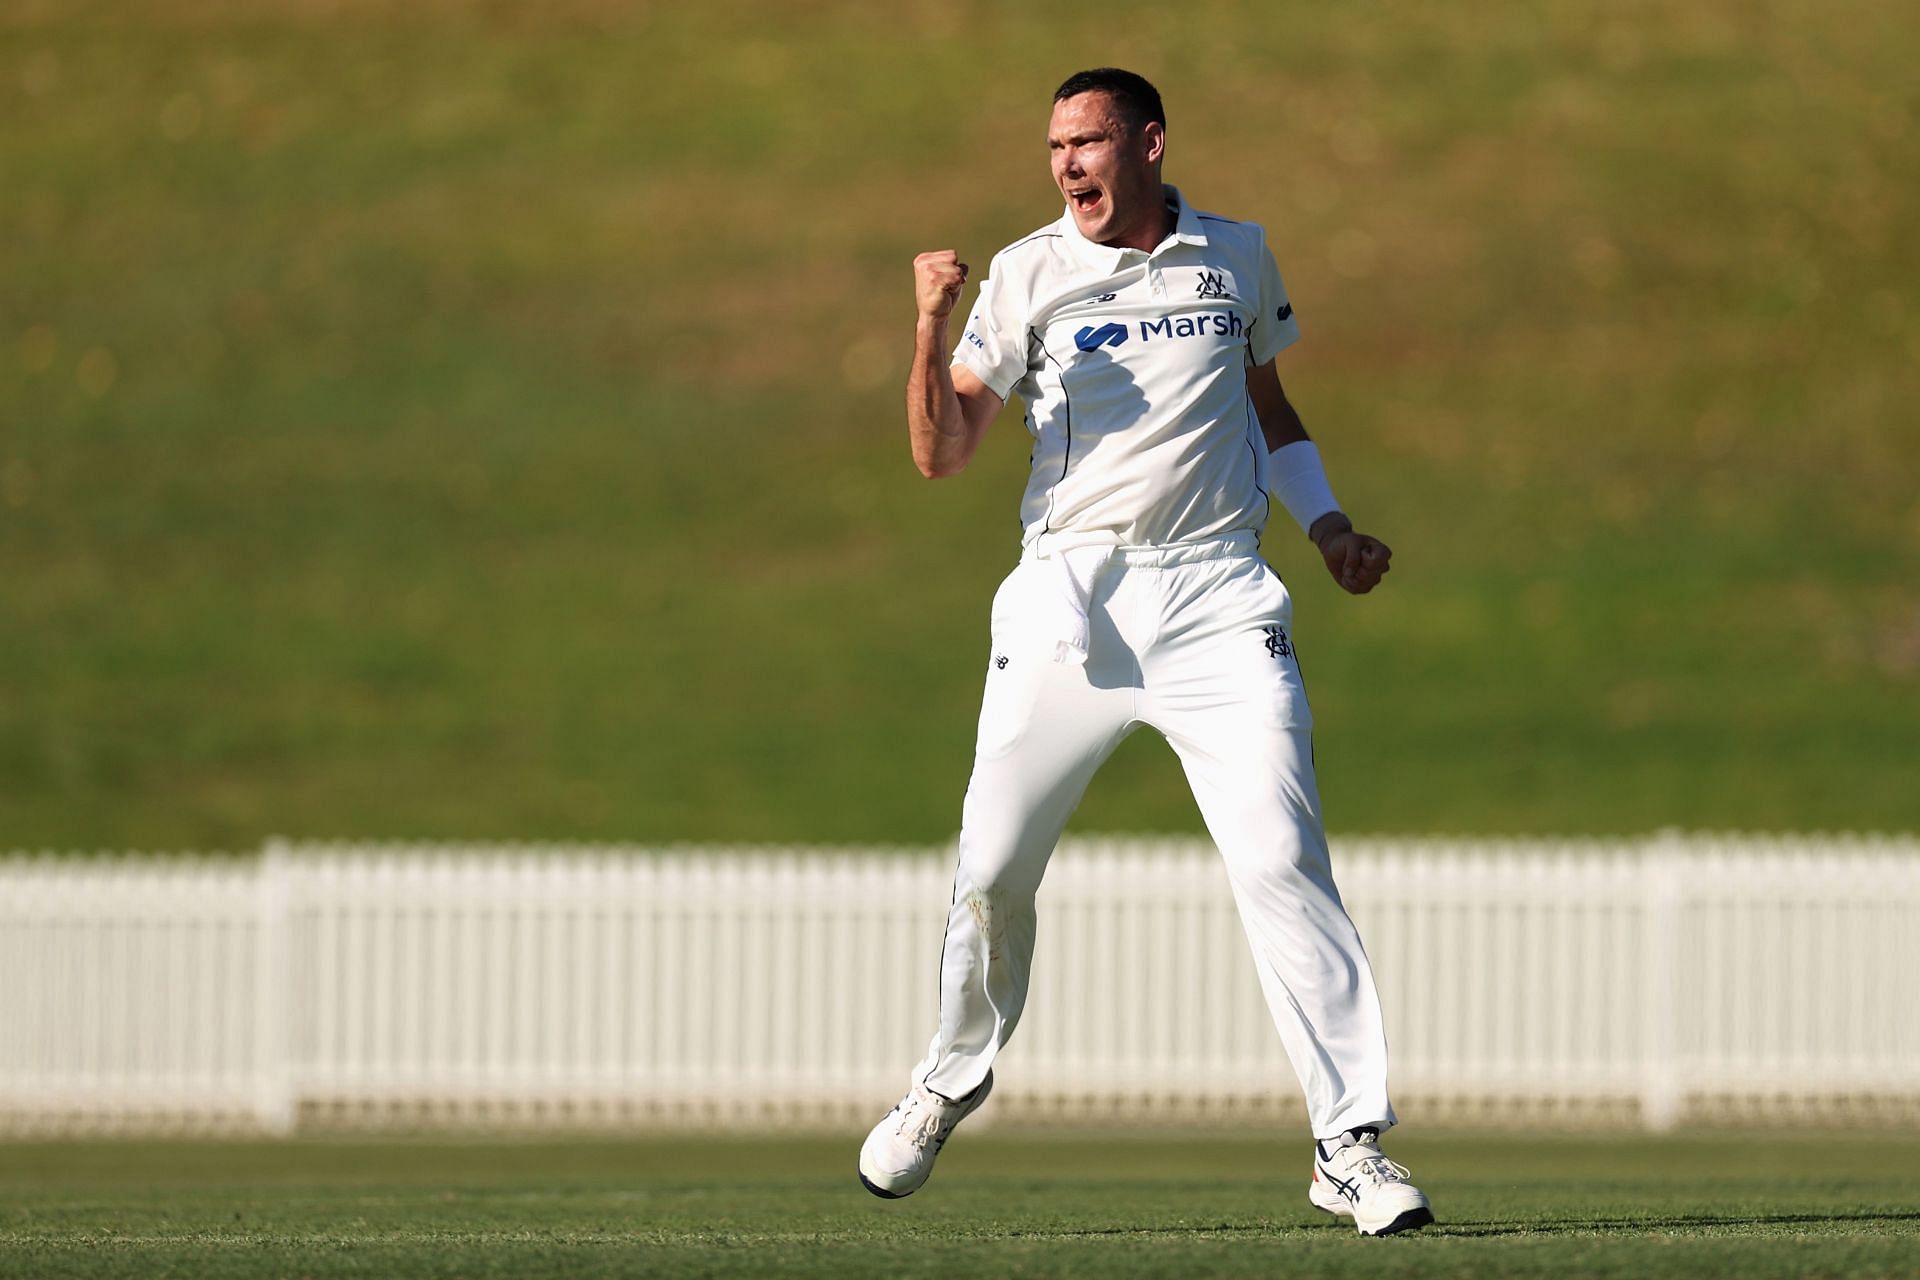 Scott Boland has been added to the Australia squad for the Boxing Day Test